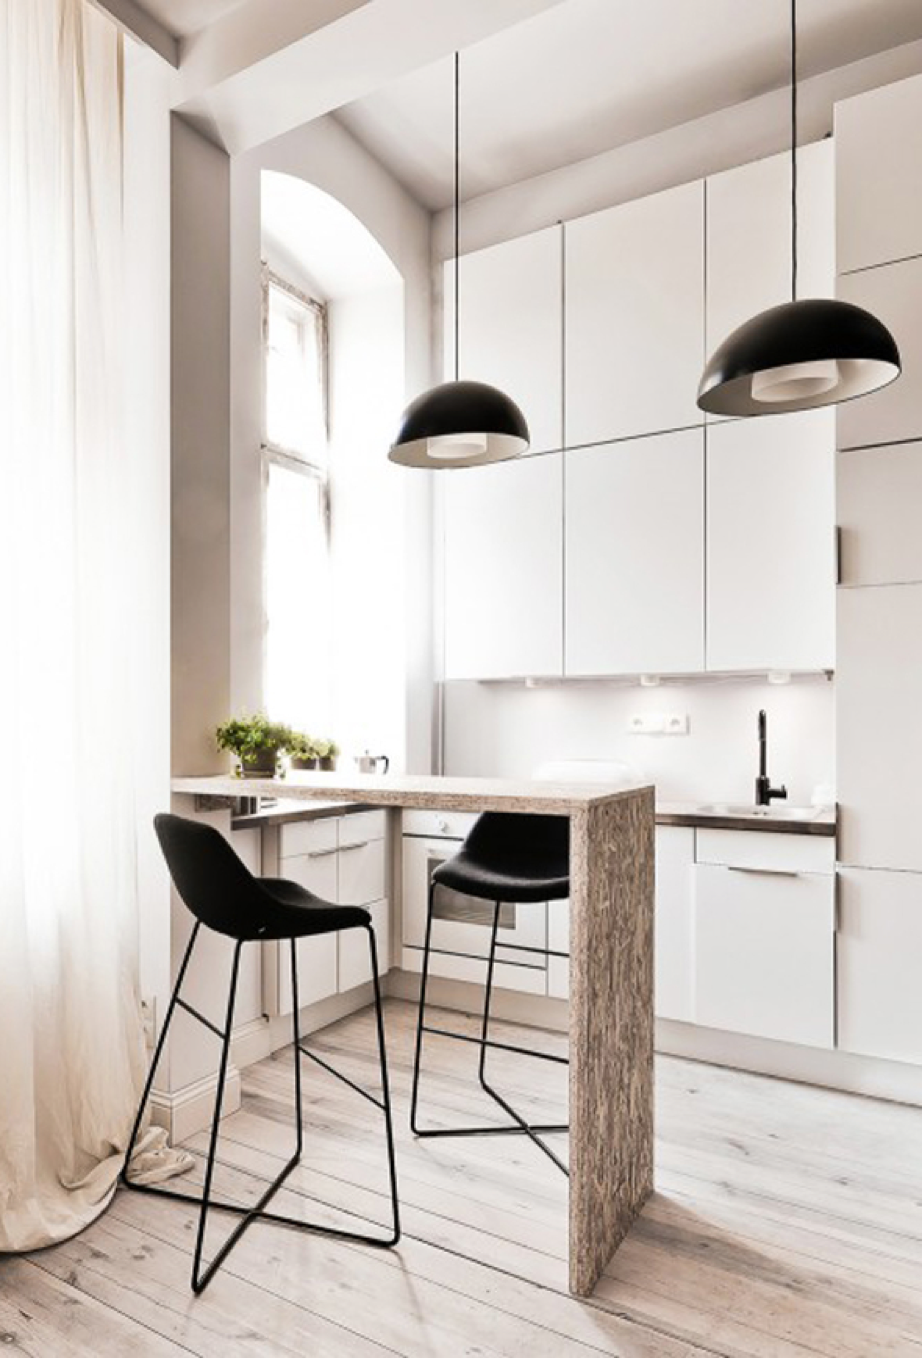 Style lessons from Scandinavian studio apartments – Urbansize